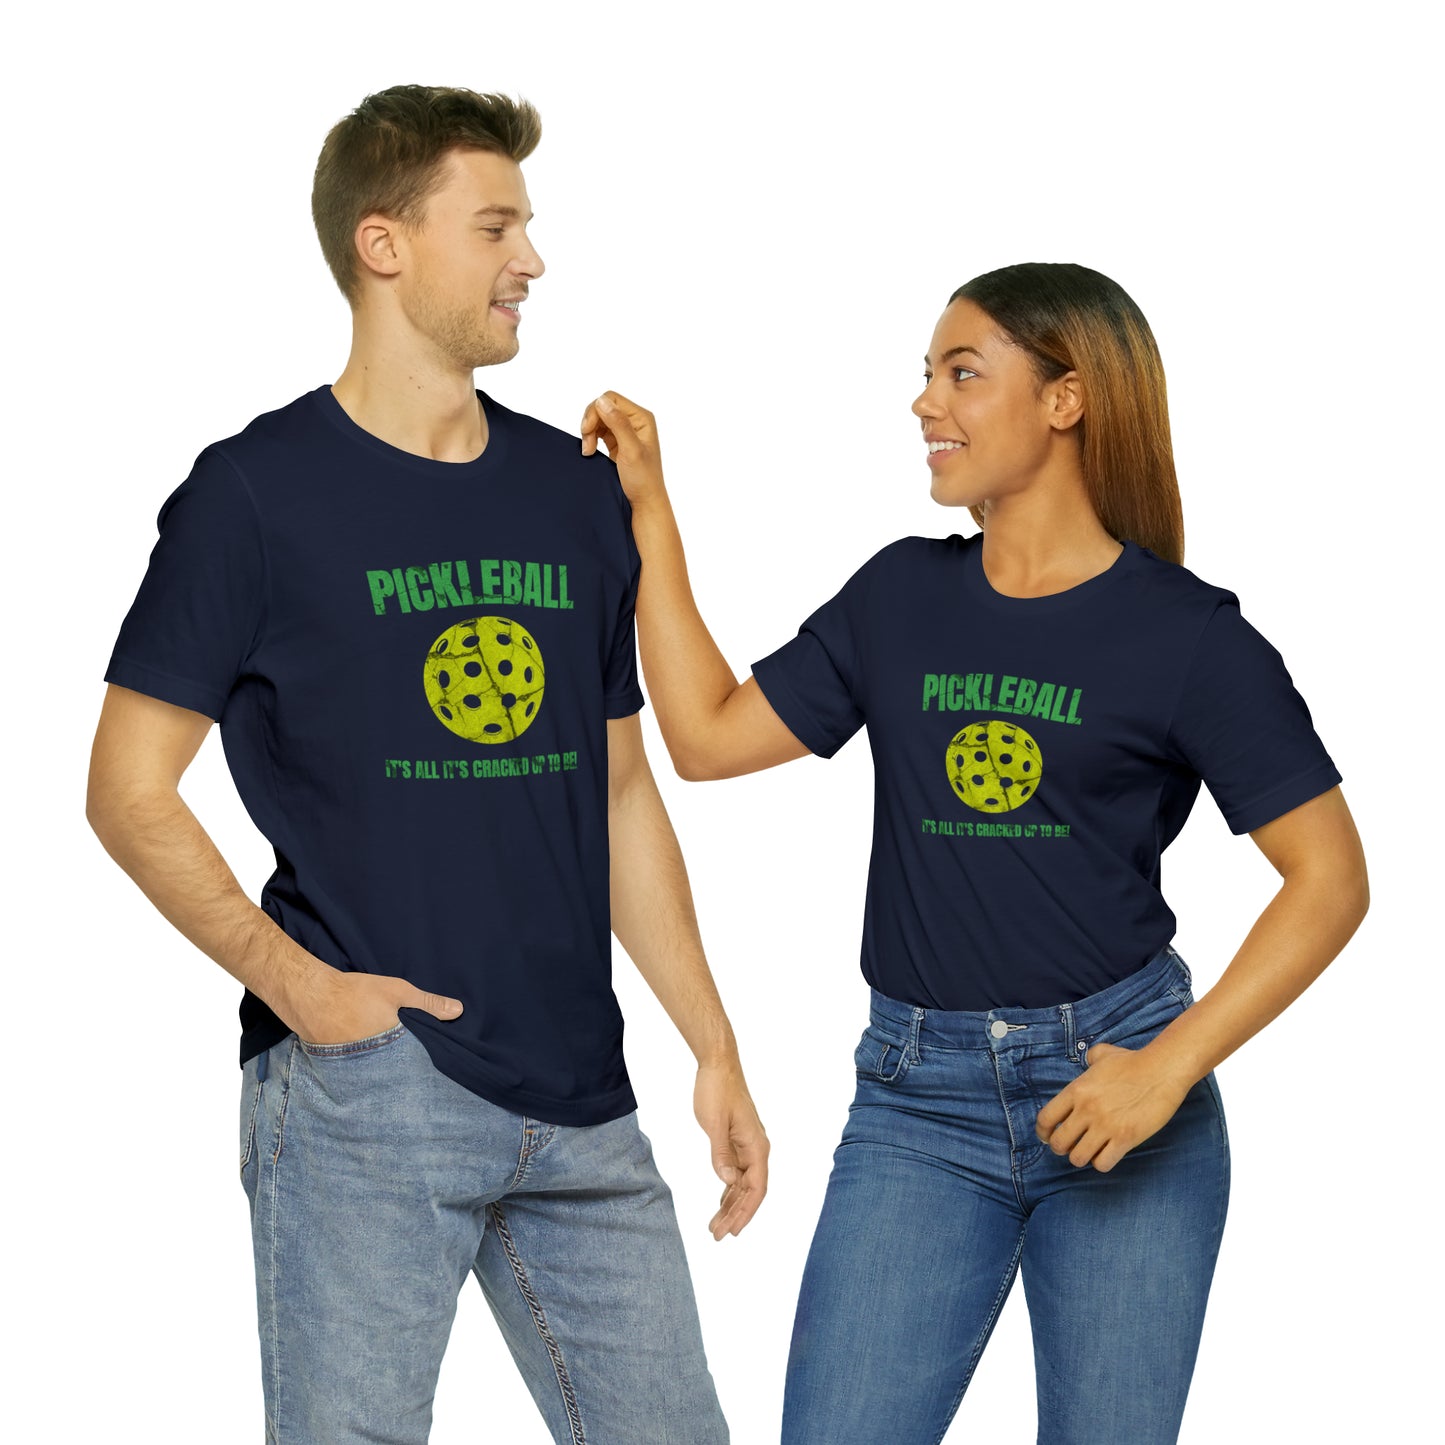 Pickleball, It's All It's Cracked Up To Be' - T-Shirt